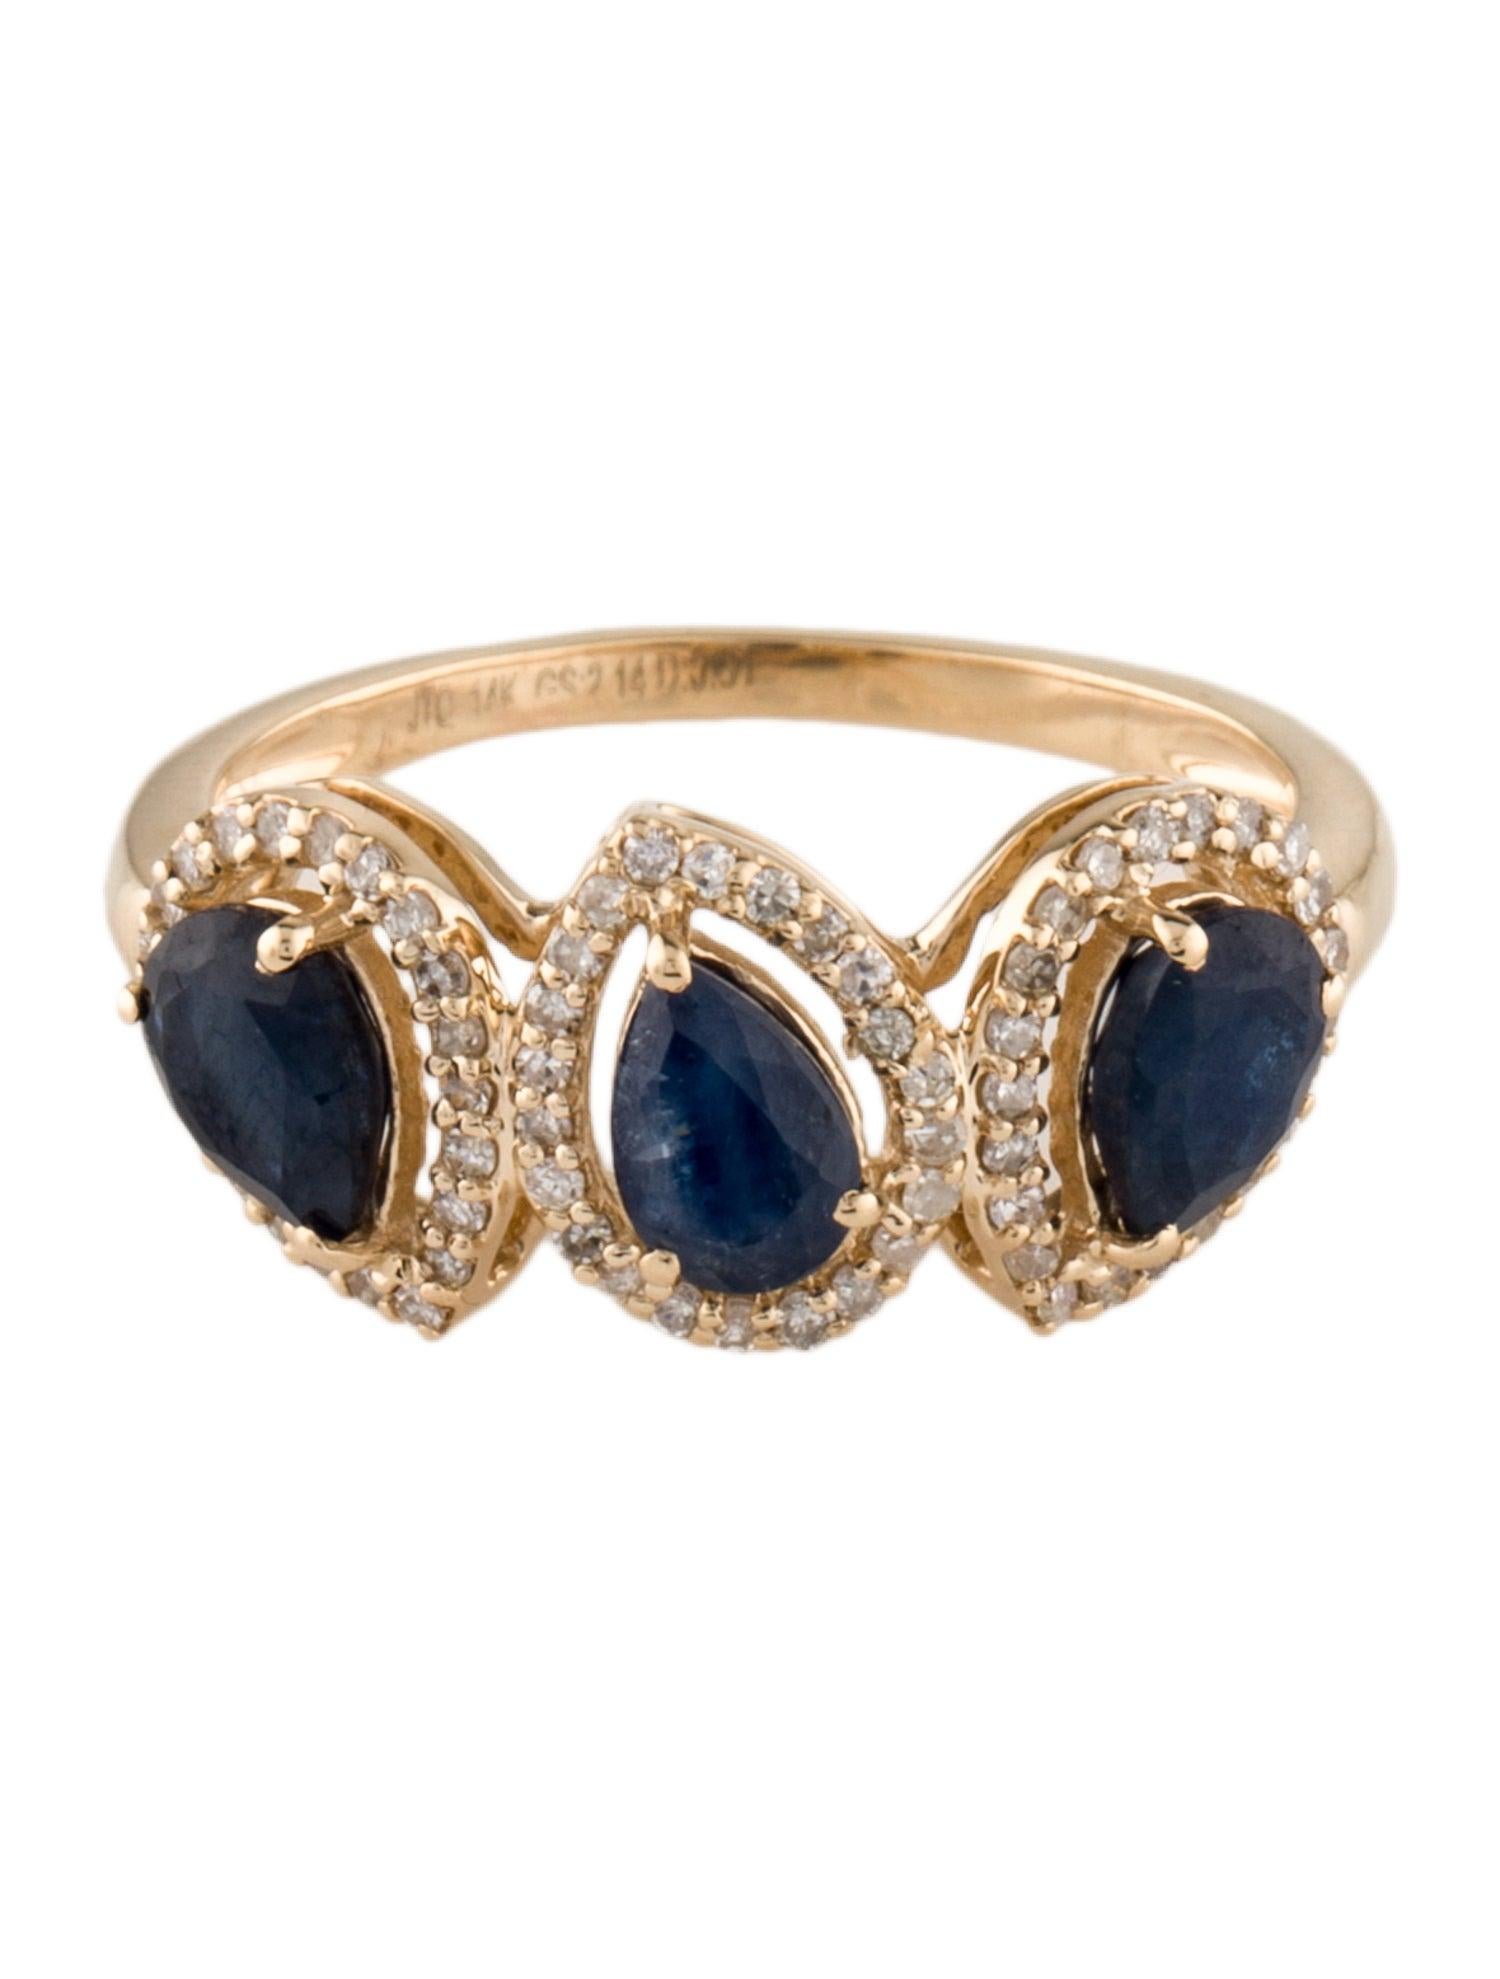 Pear Cut 14K Yellow Gold 2.14ctw Pear Modified Brilliant Sapphire & Diamond Band, Size 8 For Sale